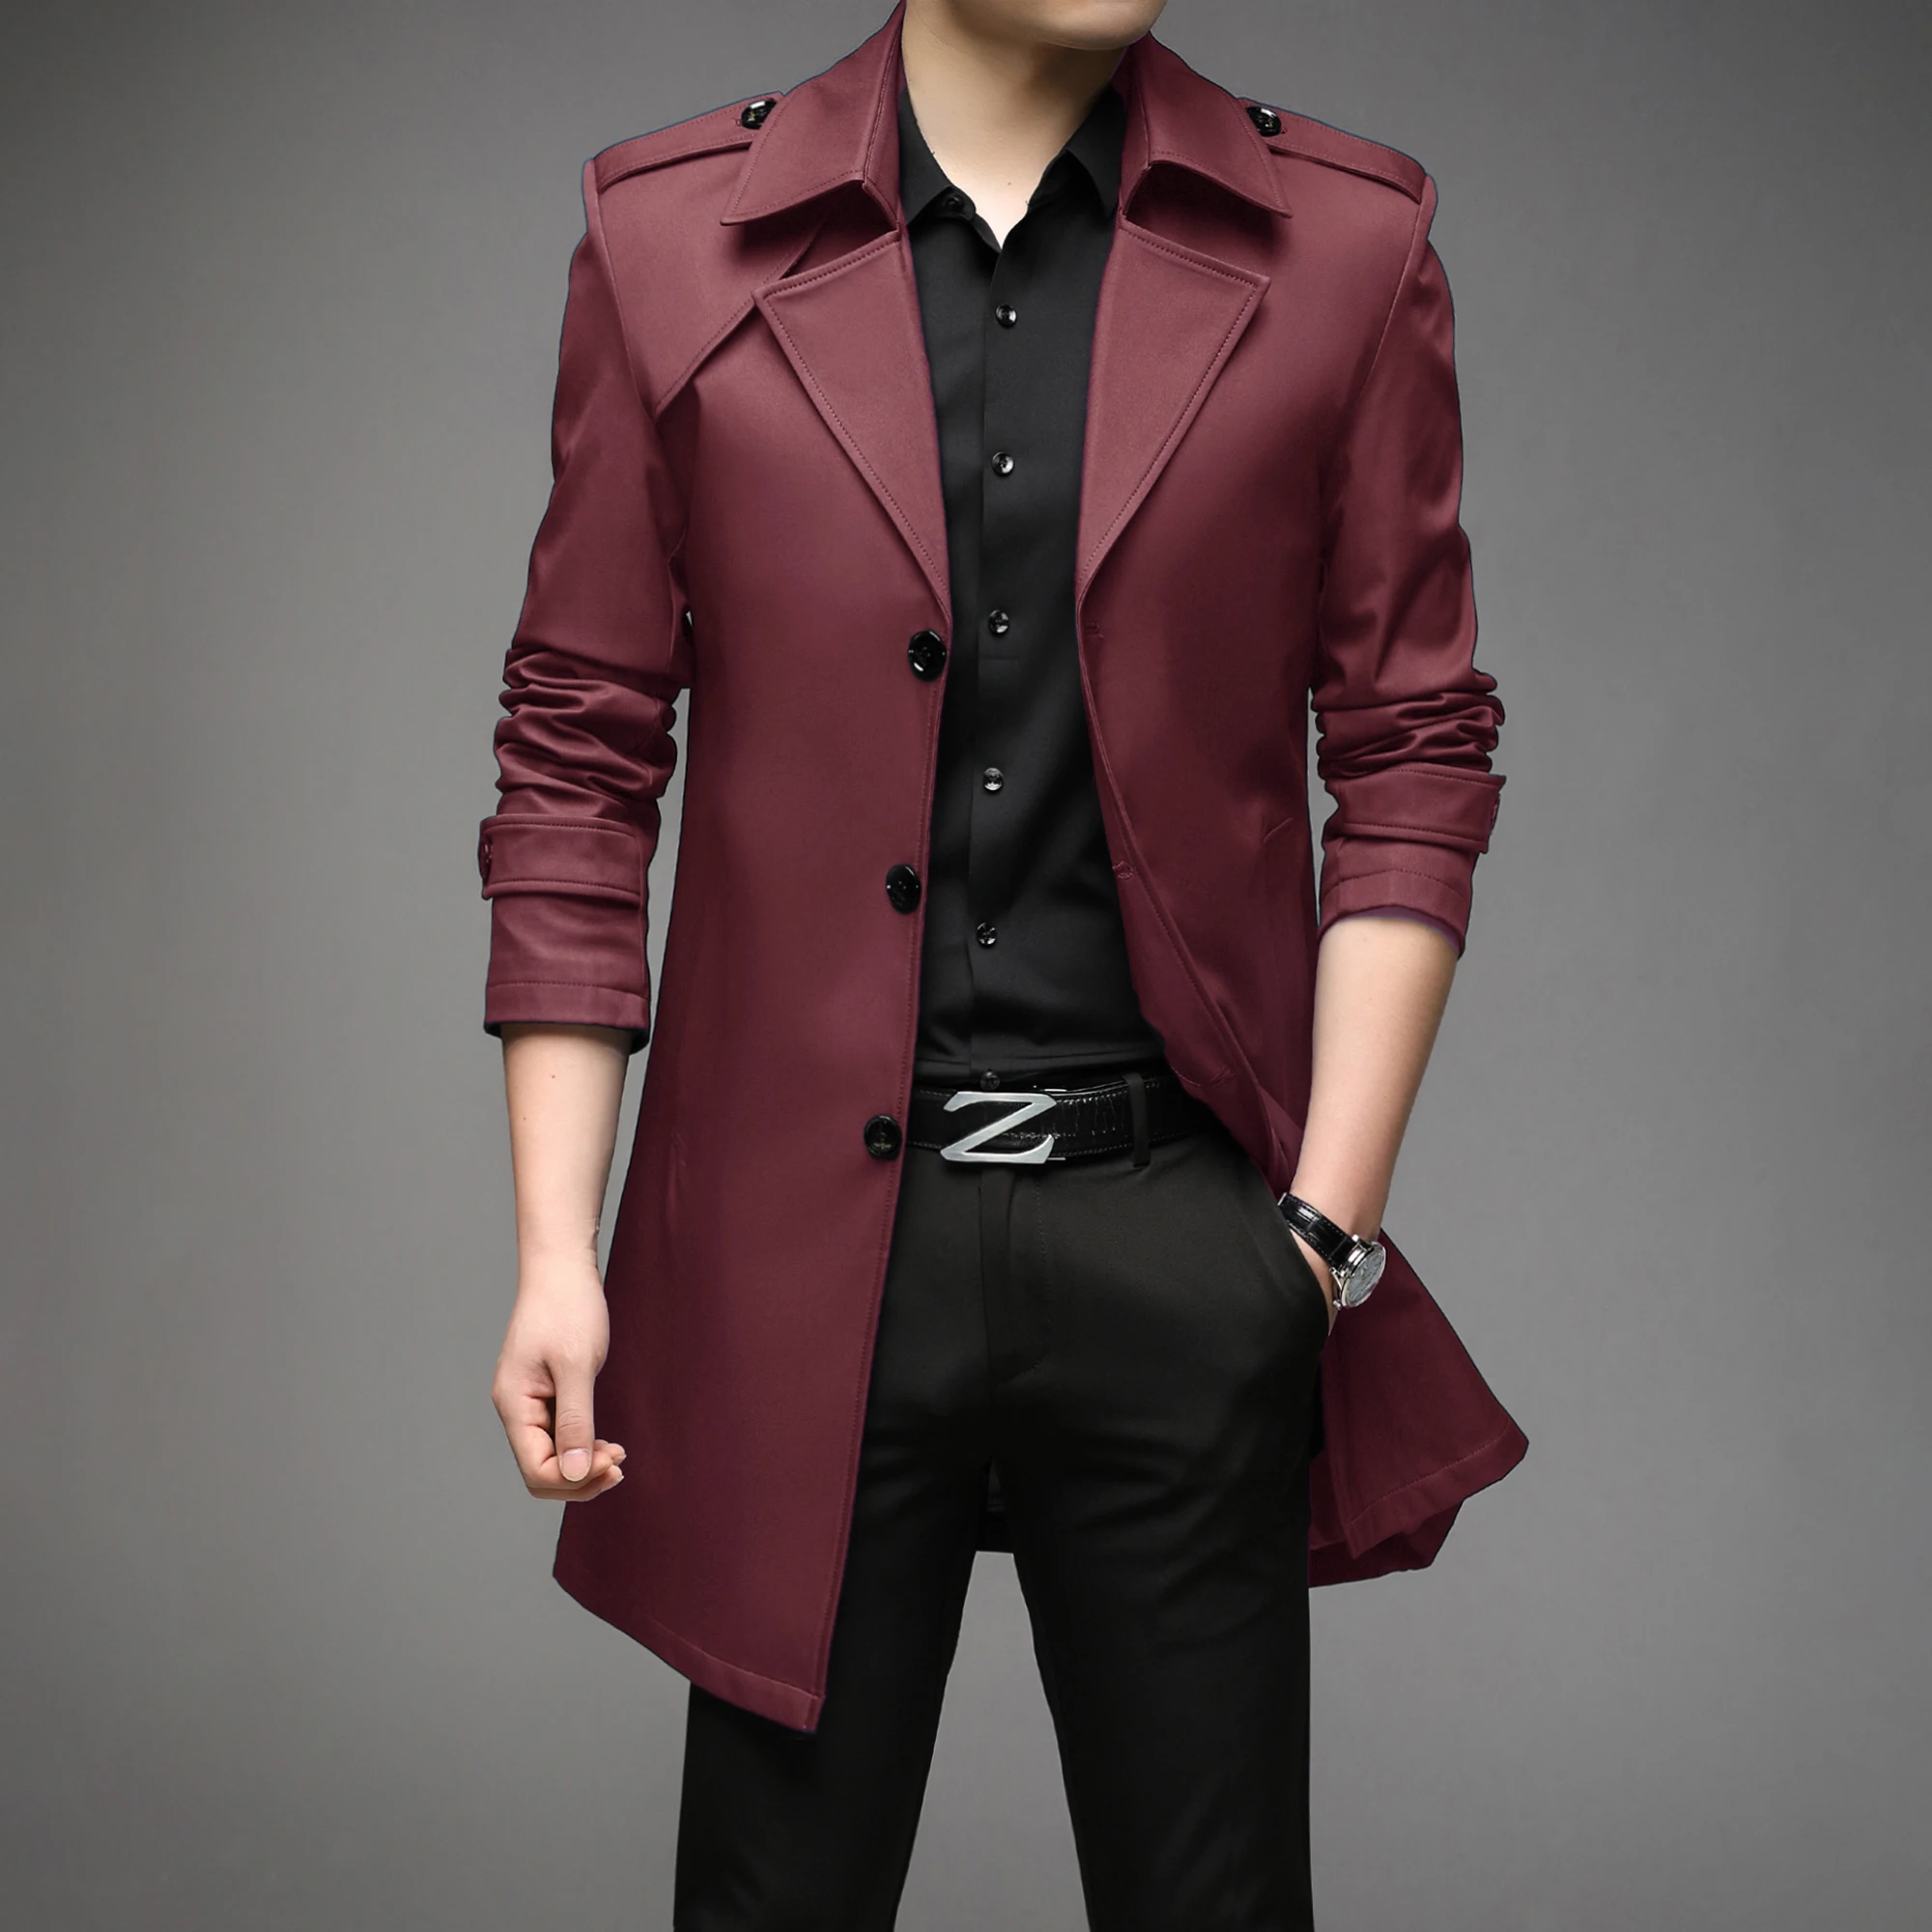 

Thoshine Brand Spring Autumn Men Trench Coats Long Superior Quality Buttons Male Fashion Outwear Trenchcoat Jacket